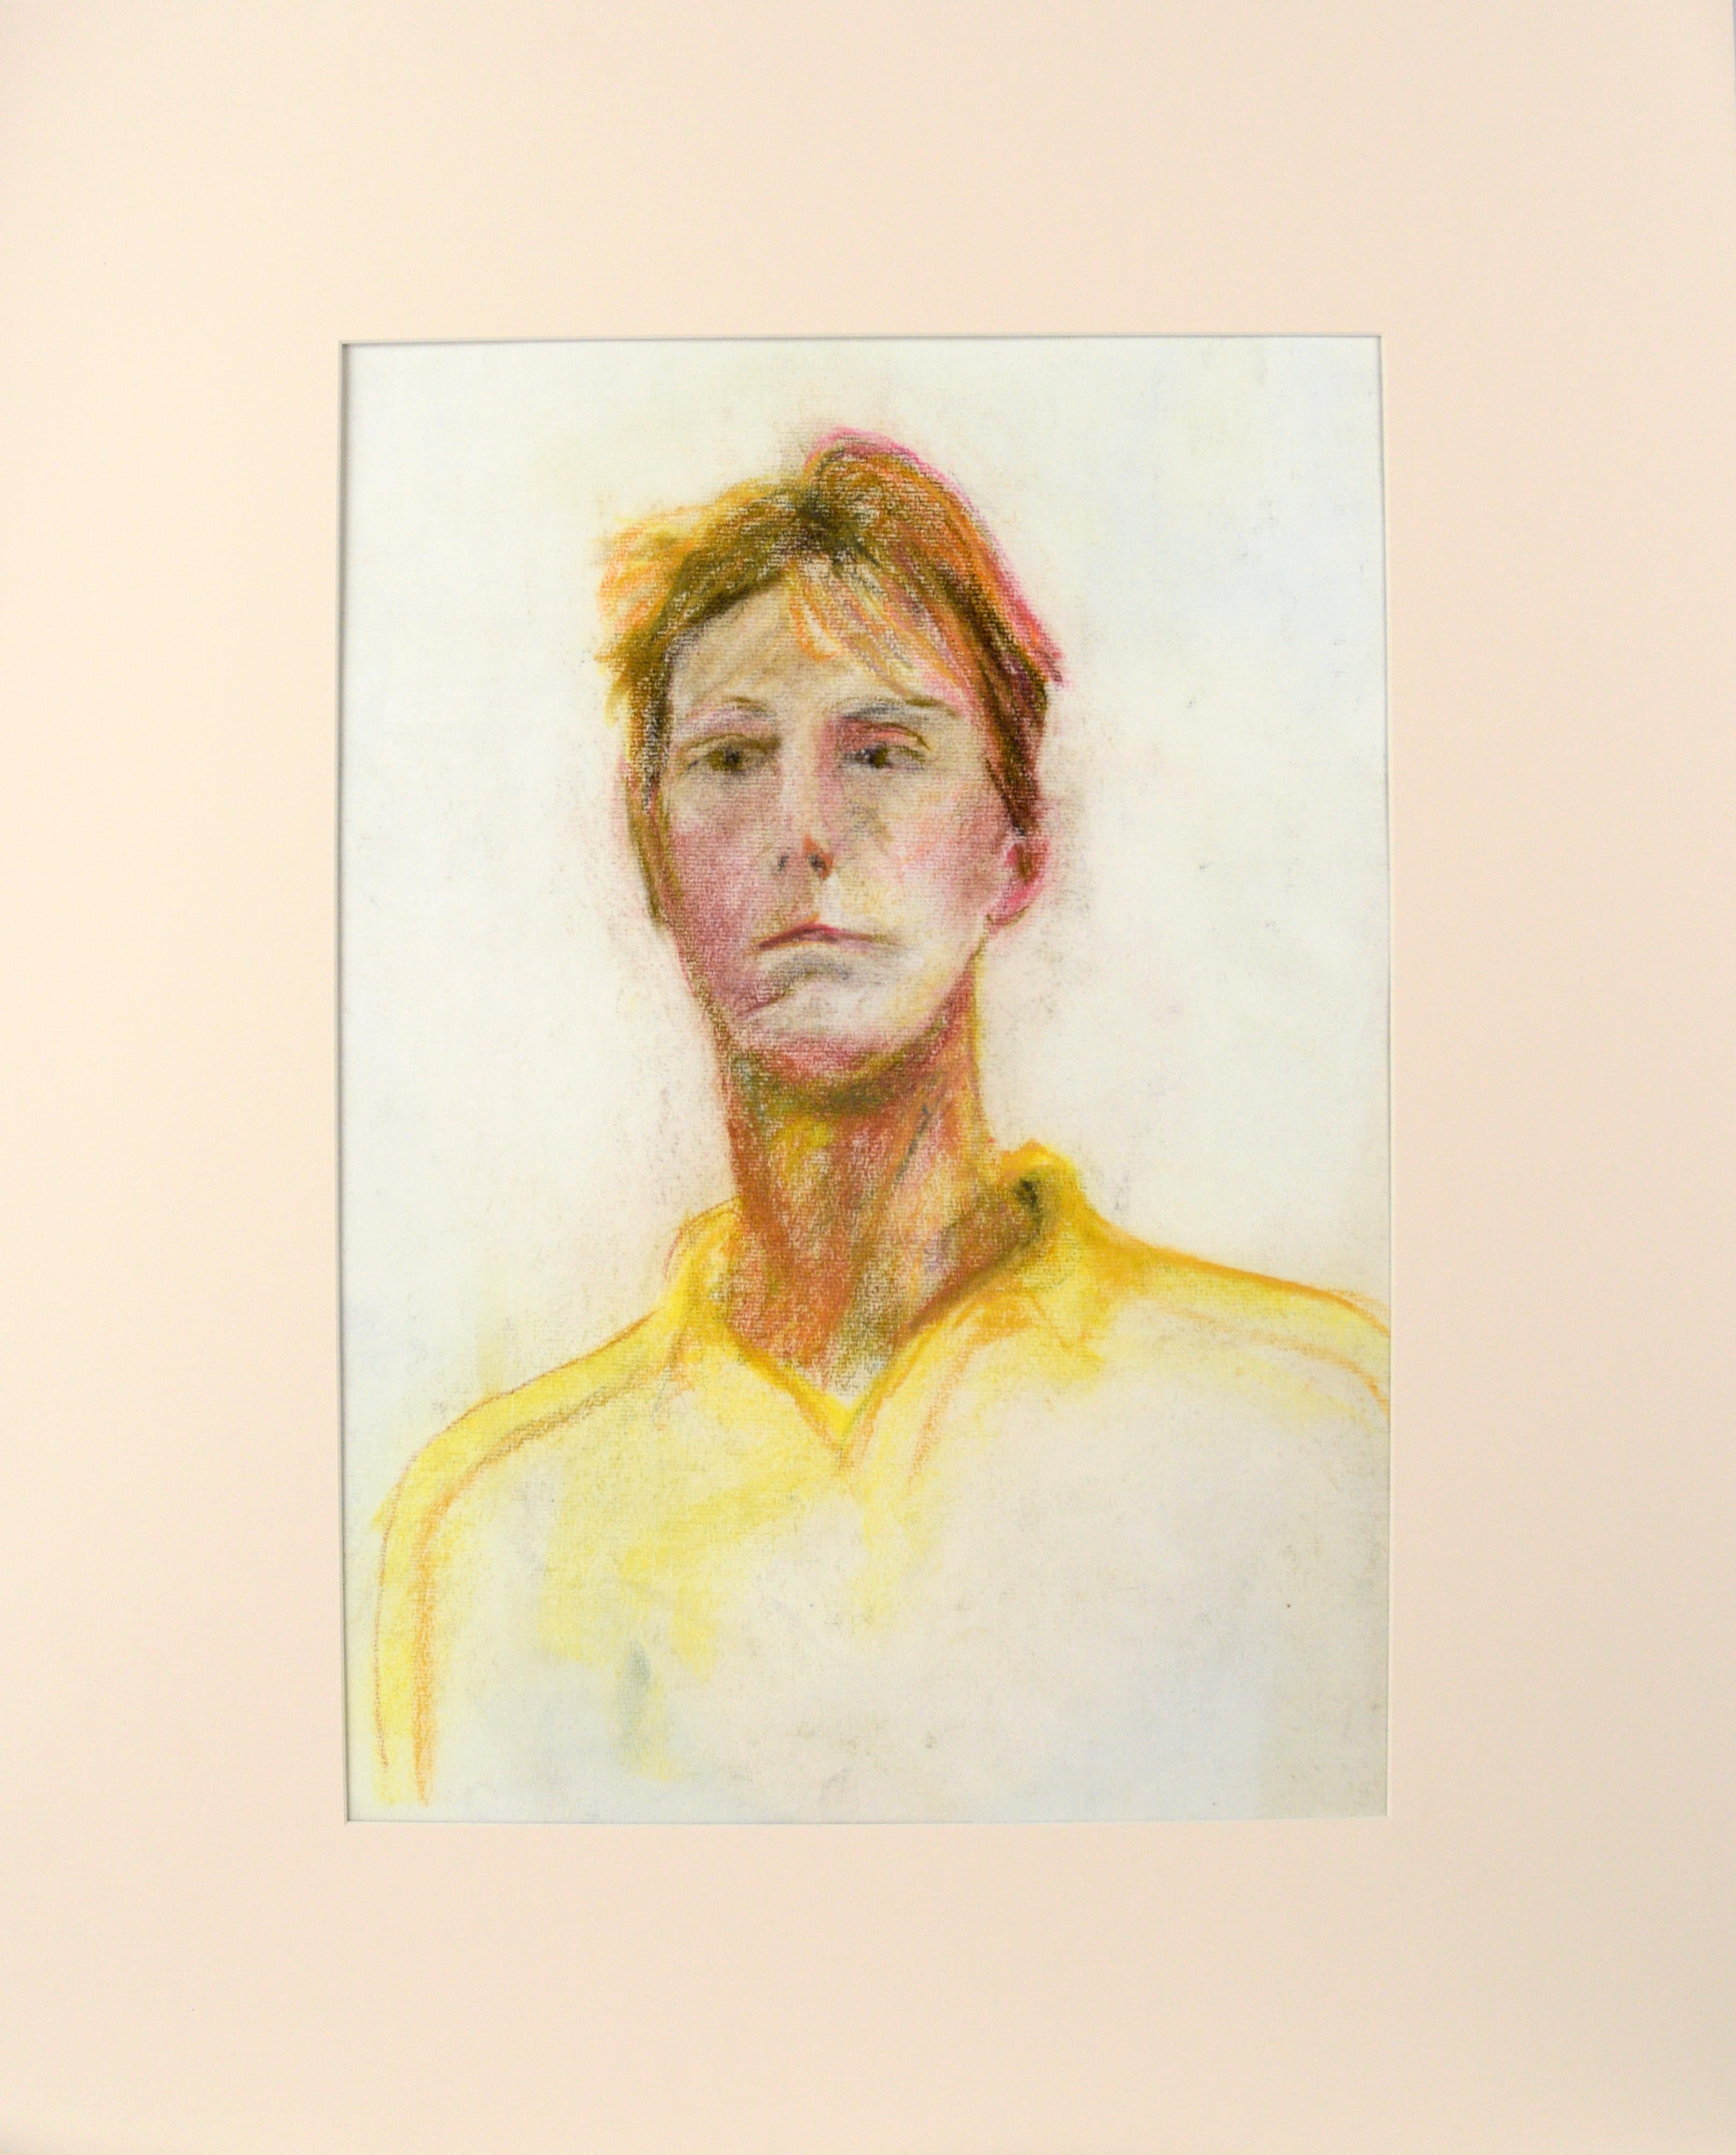 Artist's Self-Portrait in Pastel on Paper

Bright yellow and ochre make up this self-portrait in chalk pastels by Michael William Eggleston (American, 20th Century). 

Unsigned, but acquired with a collection of the artist's work.
Mat size: 30"H x